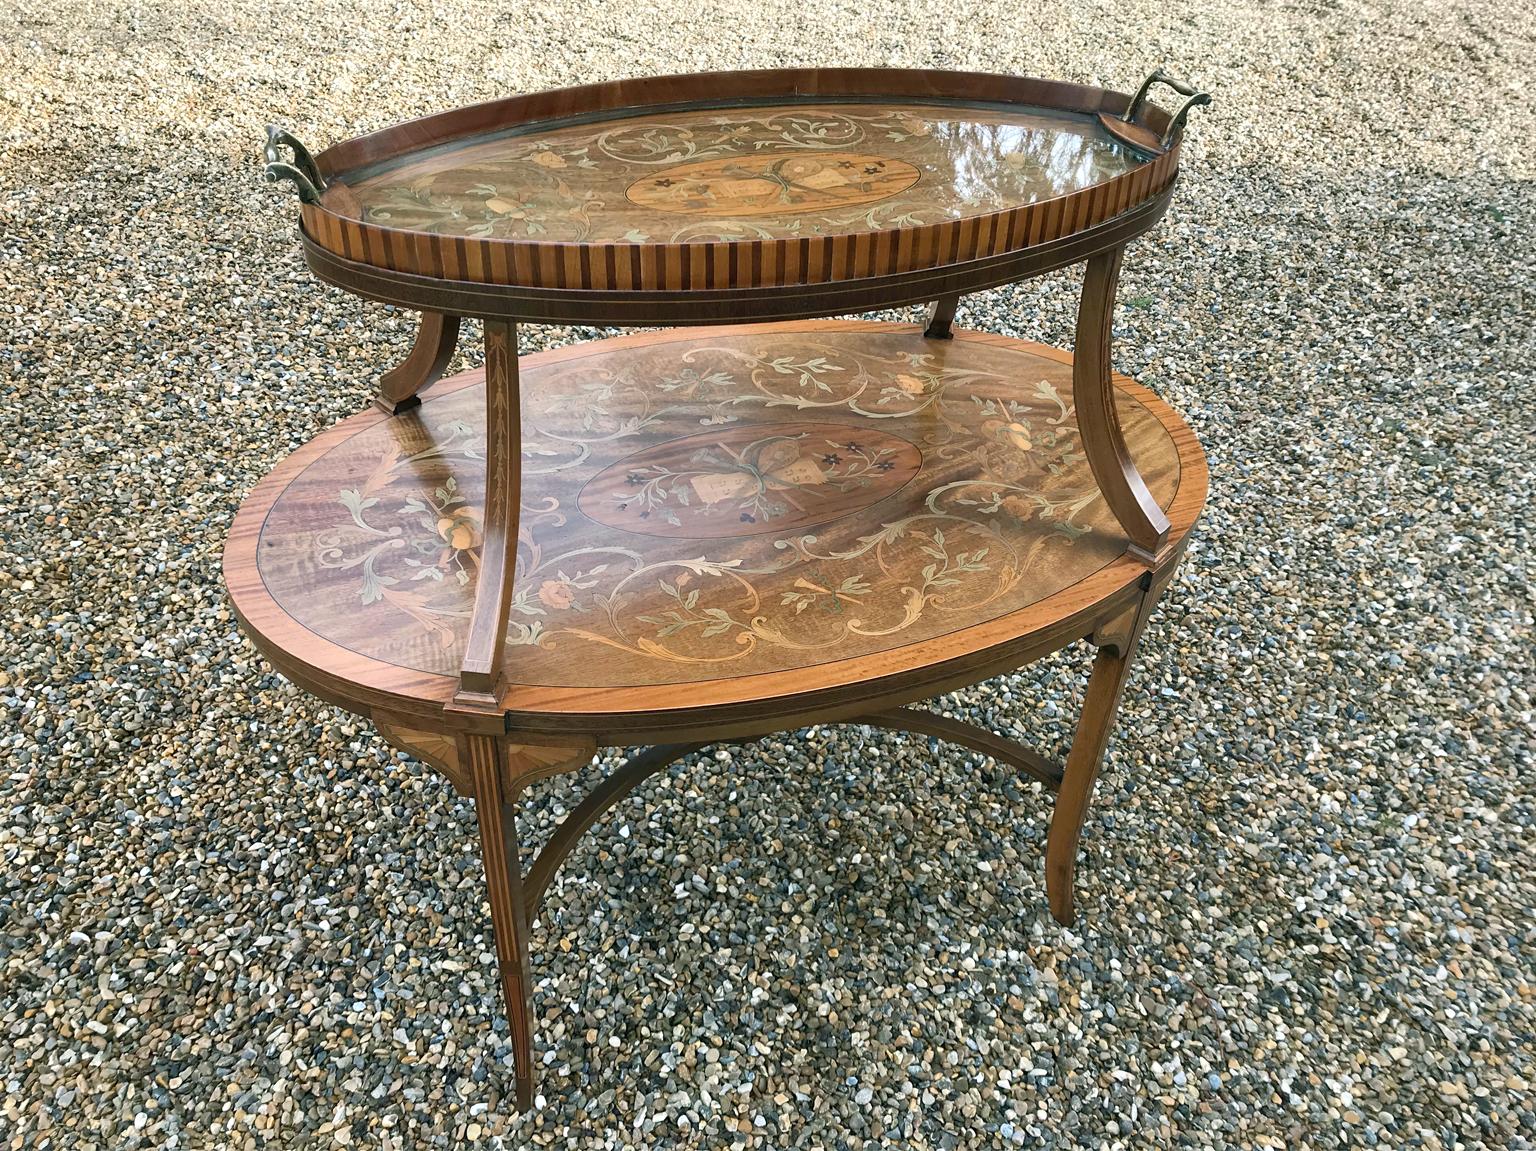 19th Century Mahogany Marquetry Tier Tray Table by S & H Jewell, London (Britisch) im Angebot